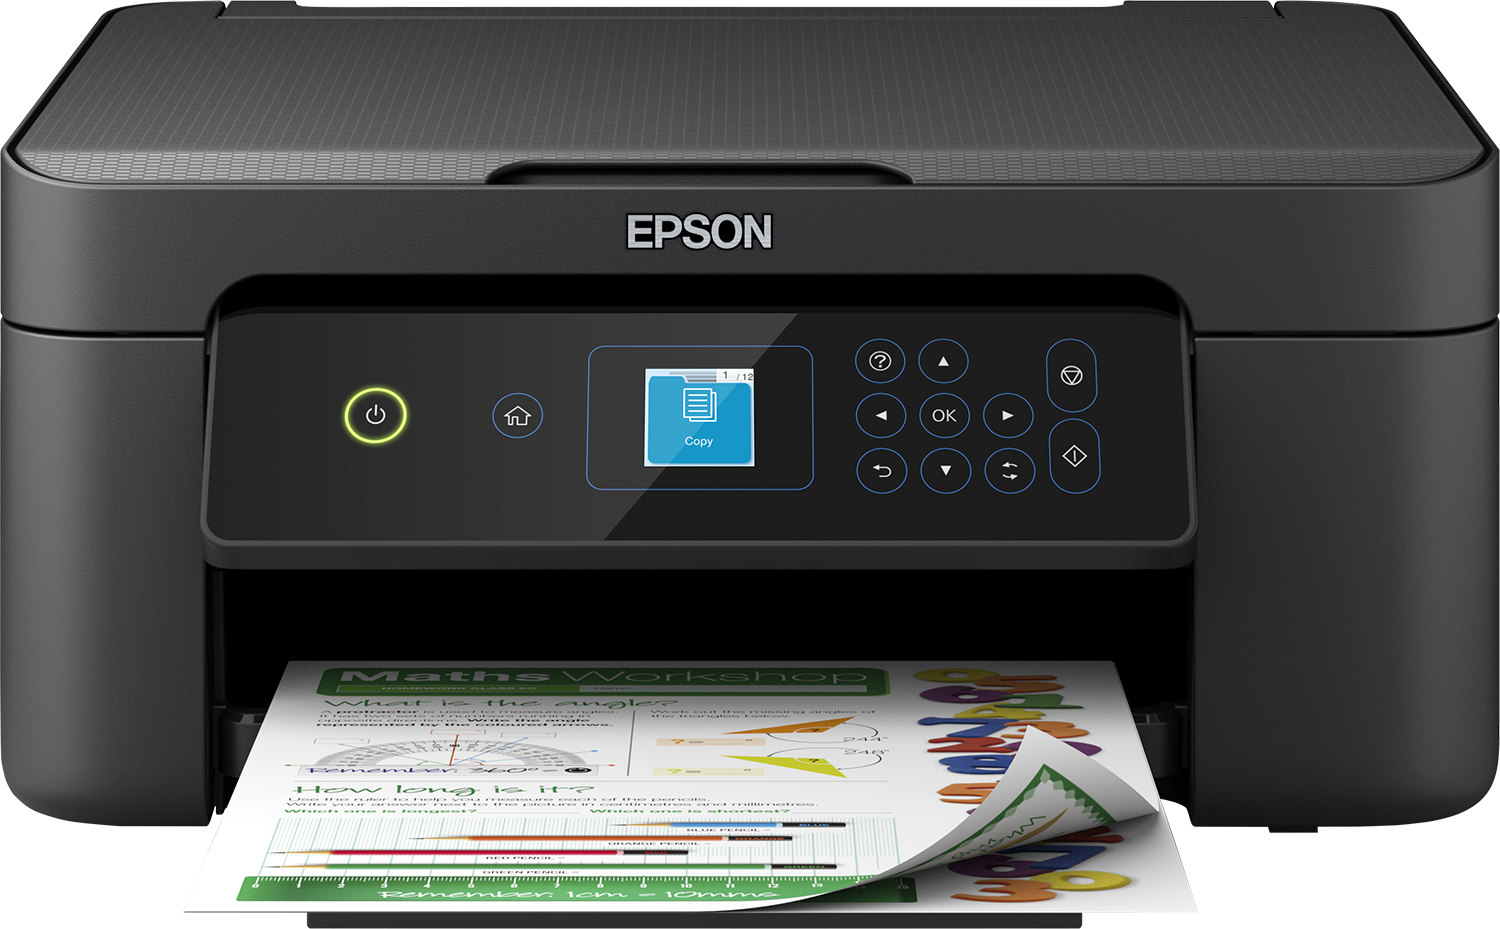 Epson XP-2205 Inkjet Printer and £10 Cashback - Free click and collect